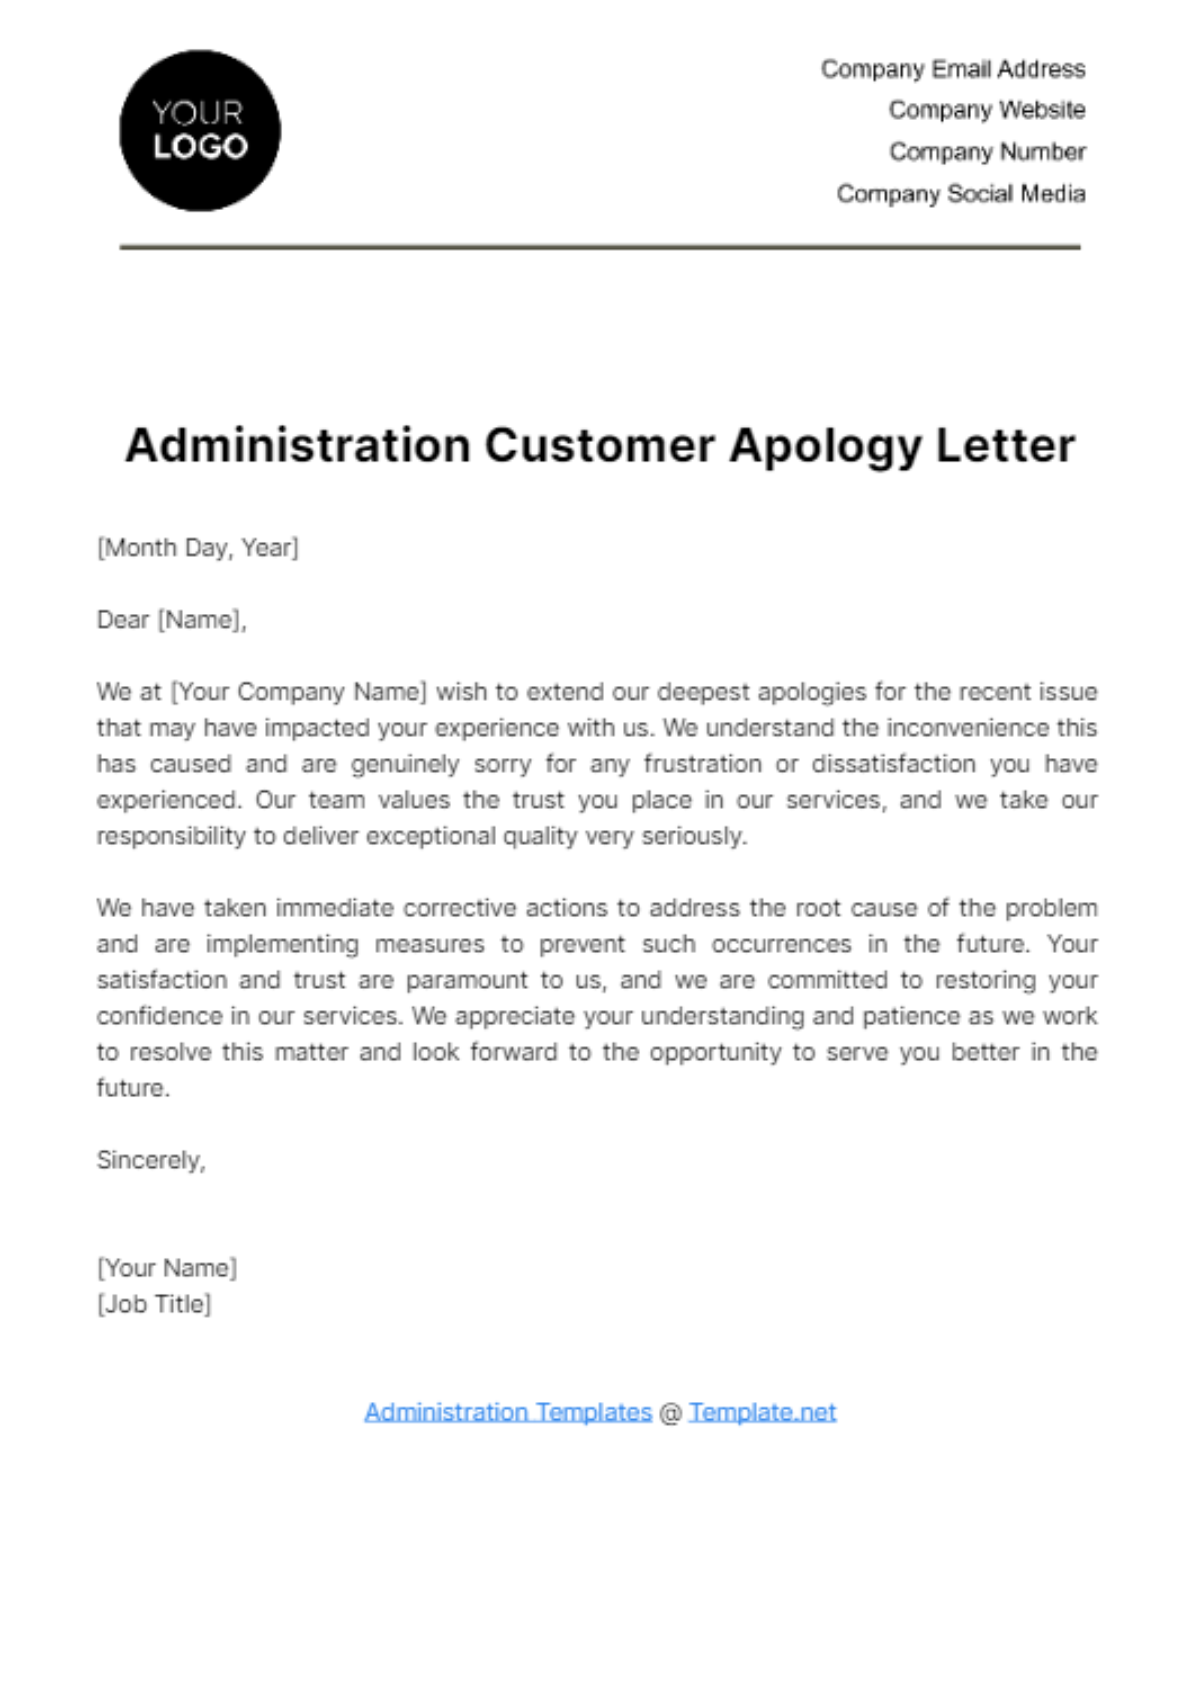 Administration Customer Apology Letter Template